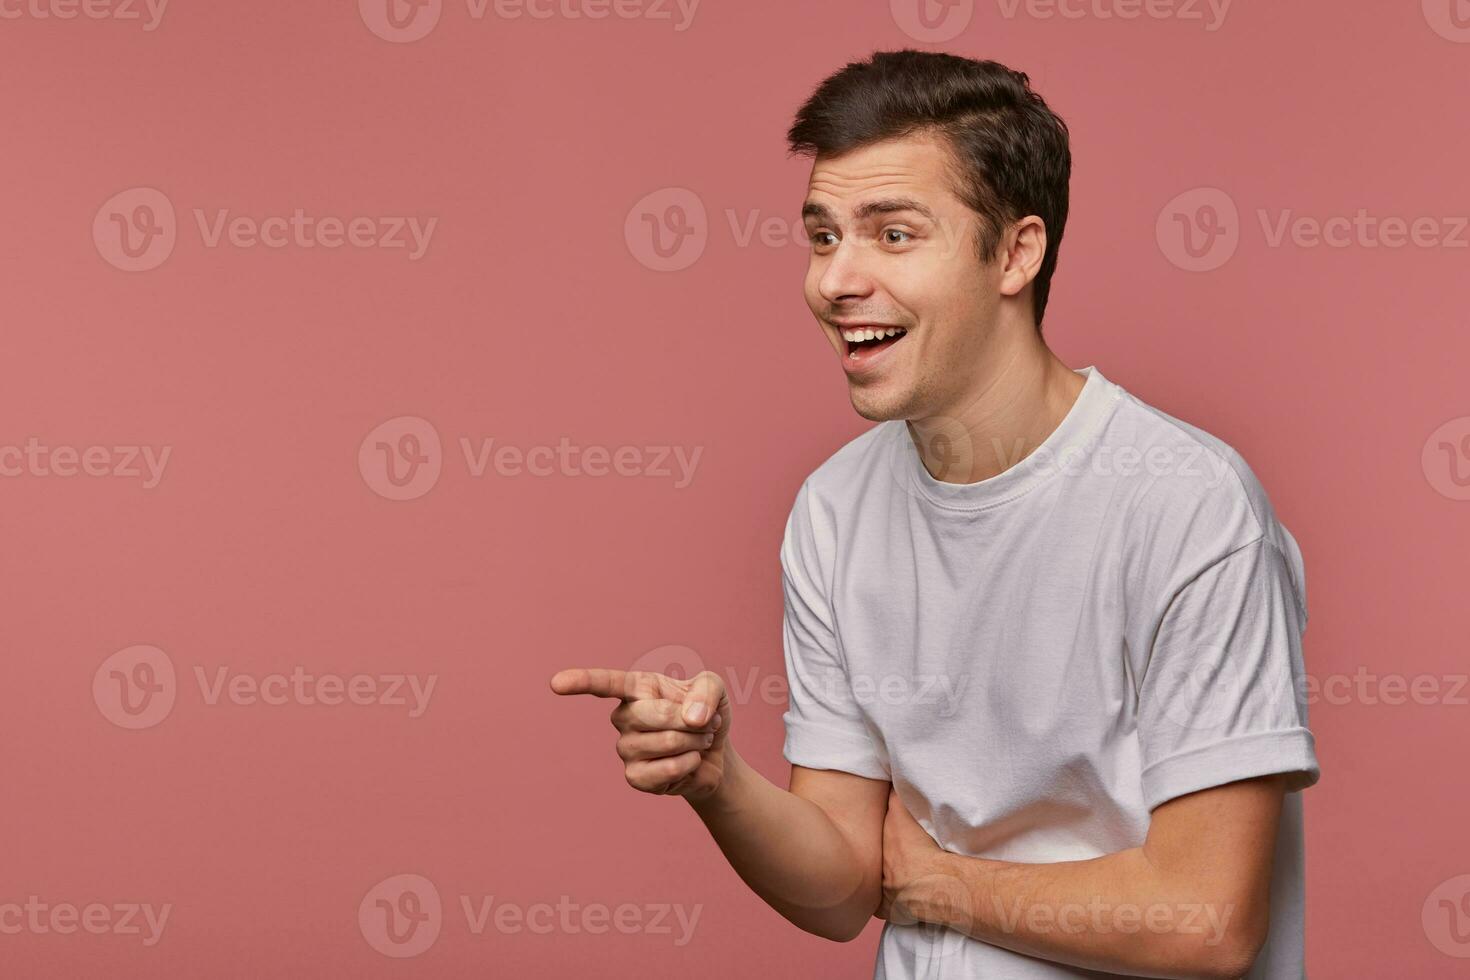 Indoor portrait of happy young dark haired male looking joyfully aside, raising hand and pointing with index finger, standing over pink background in grey t-shirt photo